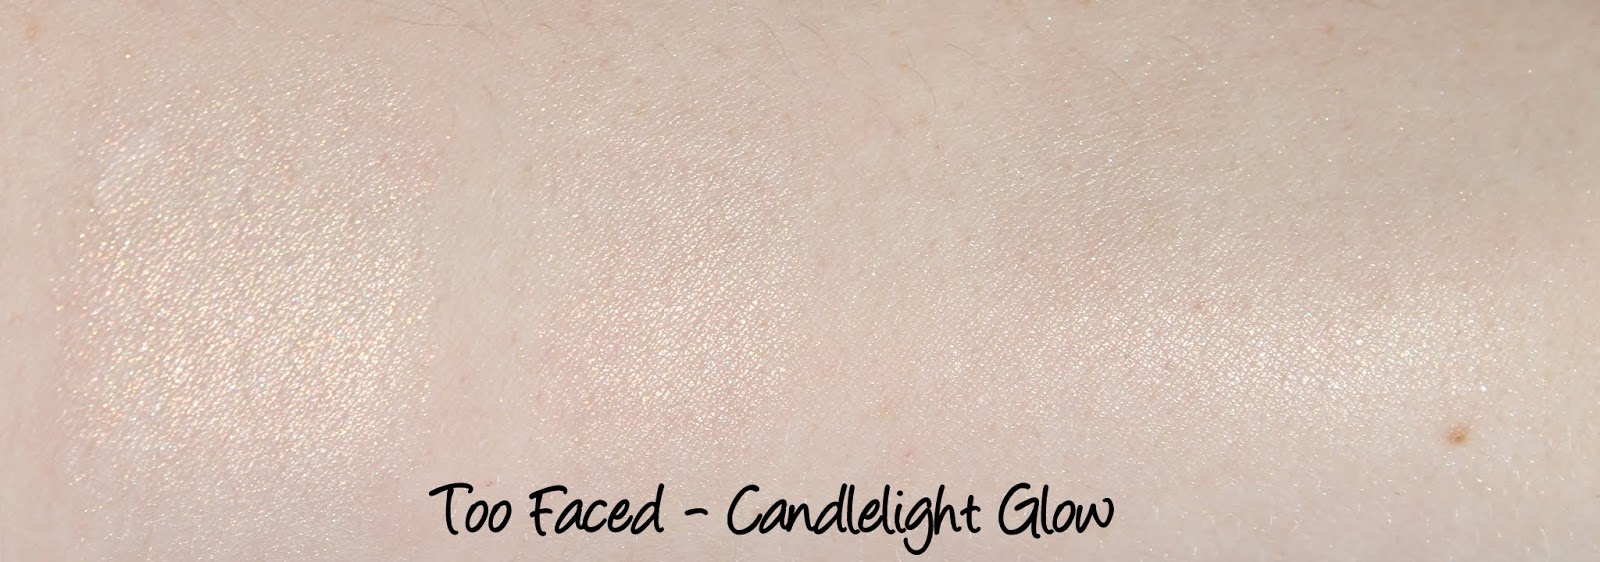 Too Faced Candlelight Glow Swatches & Review